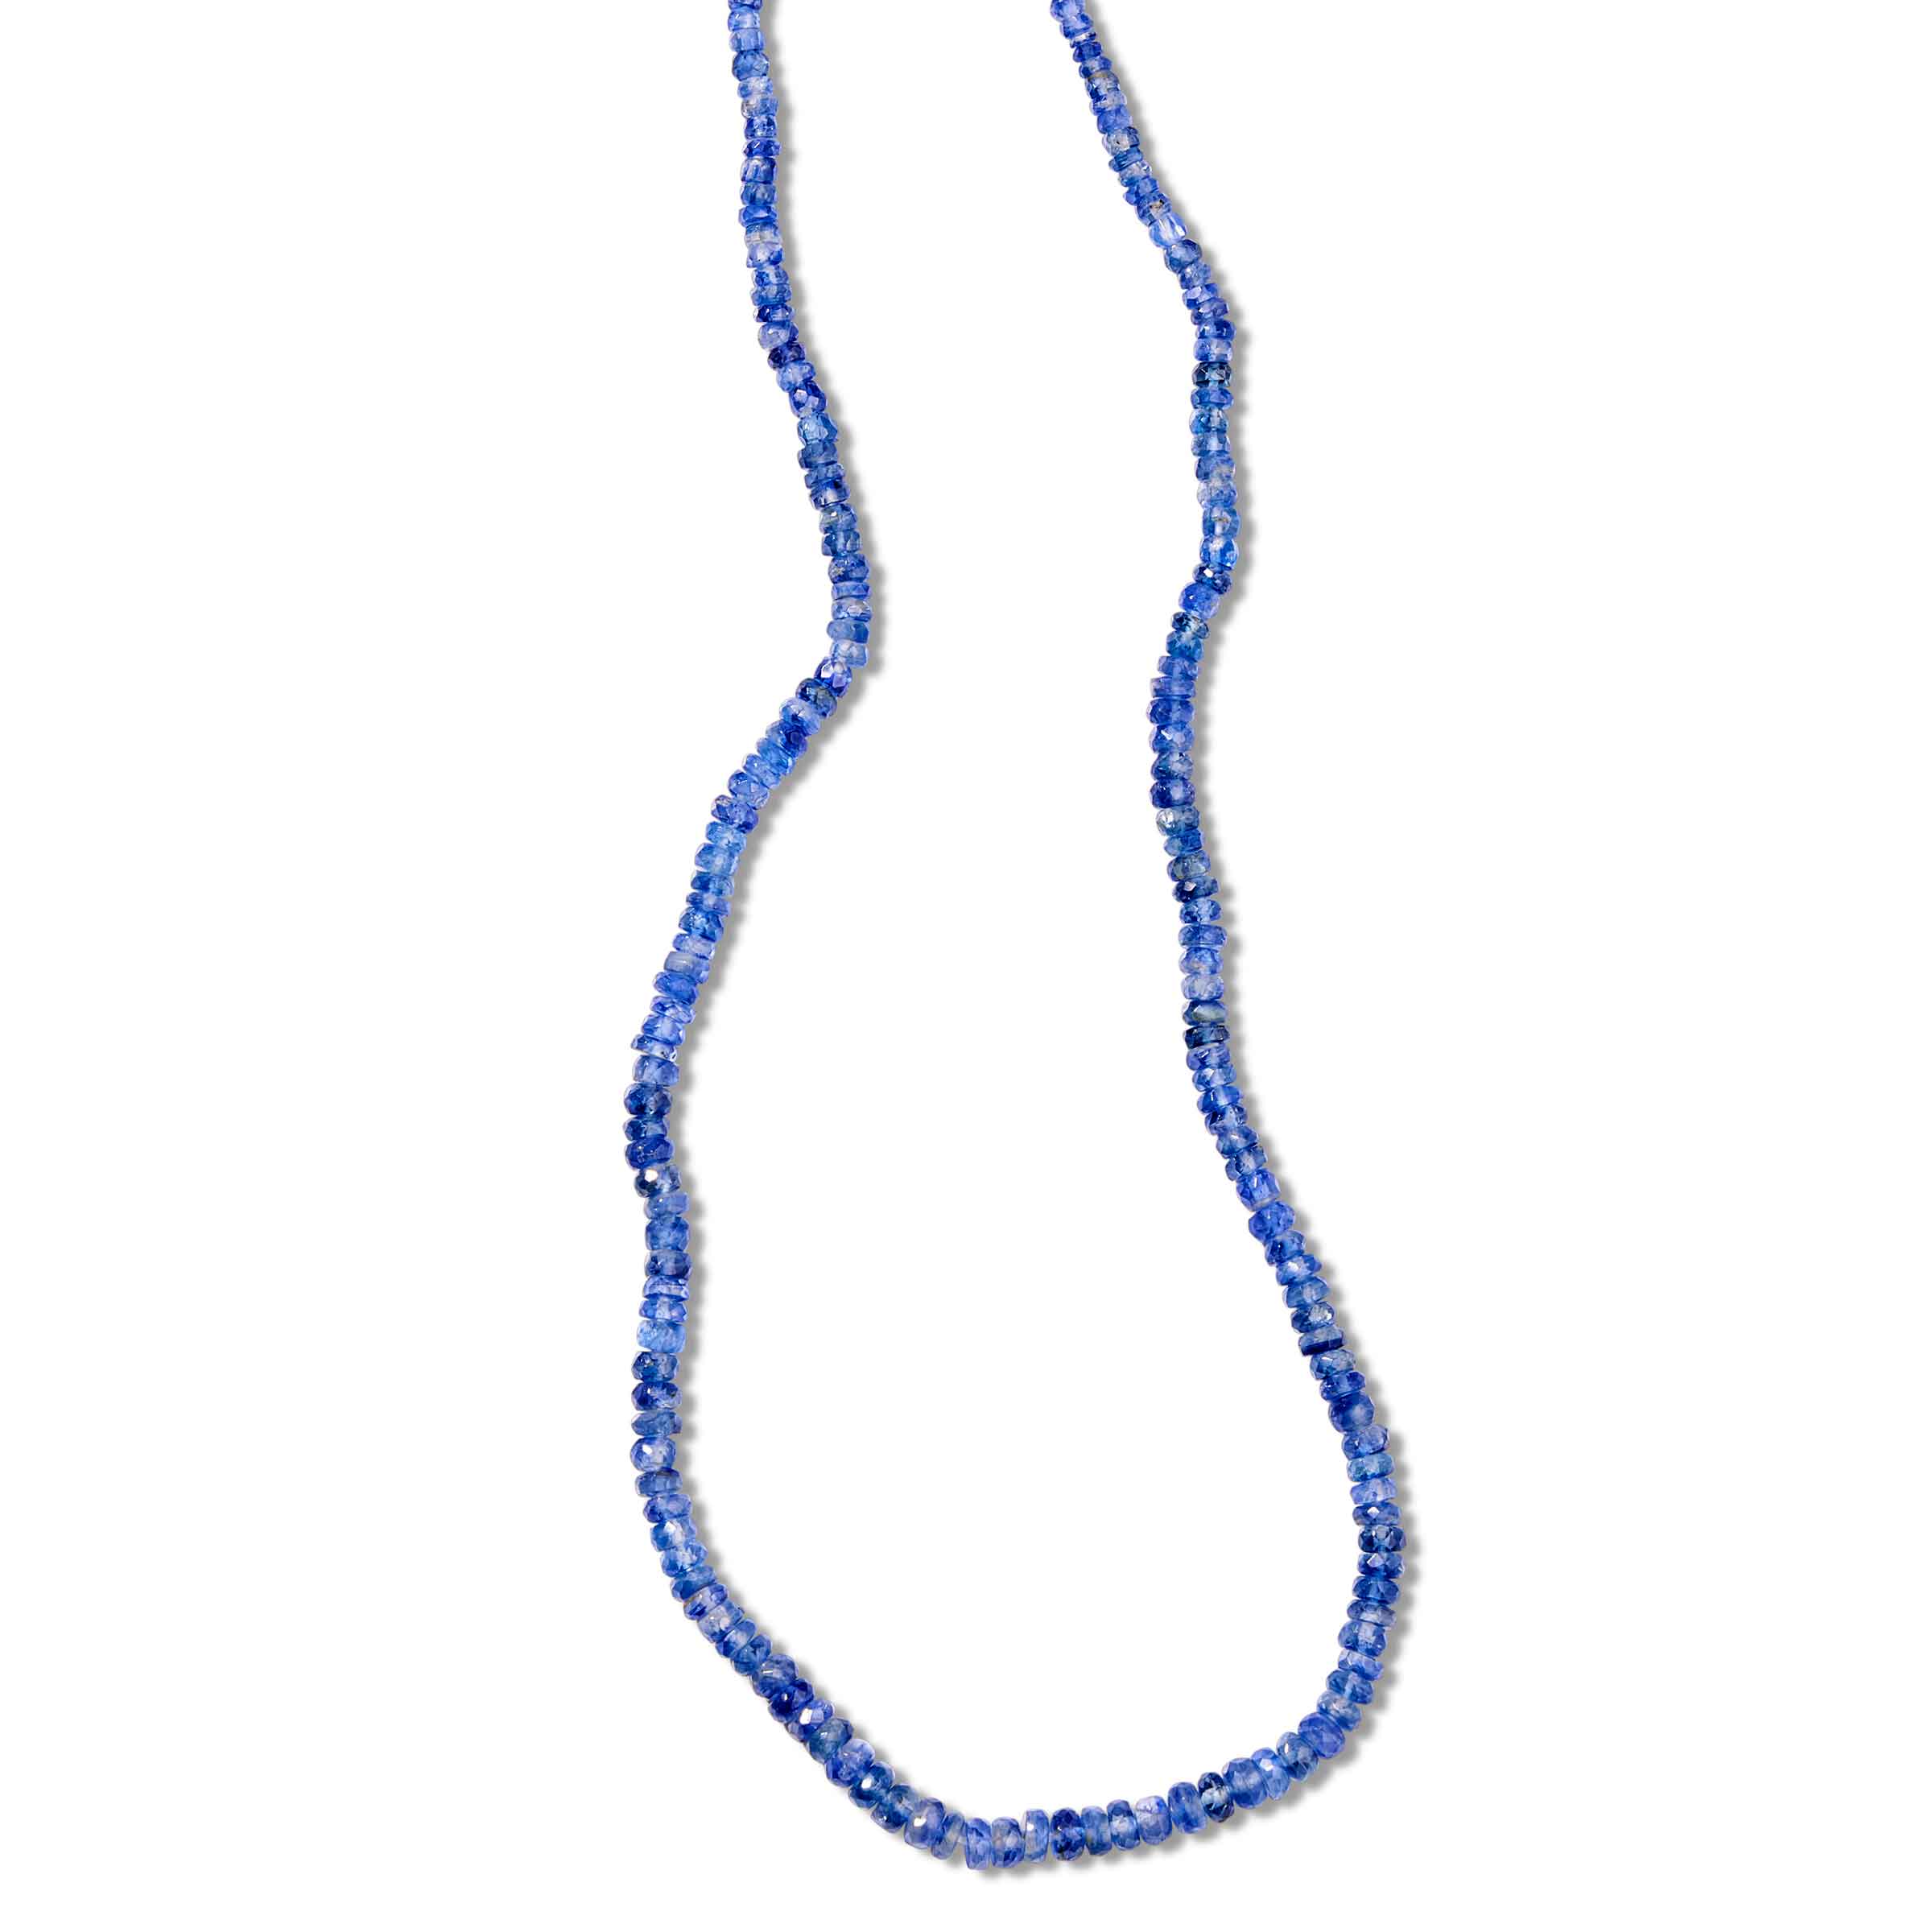 Kyanite Bead Necklace, 18 Inches, Sterling Silver | Gemstone